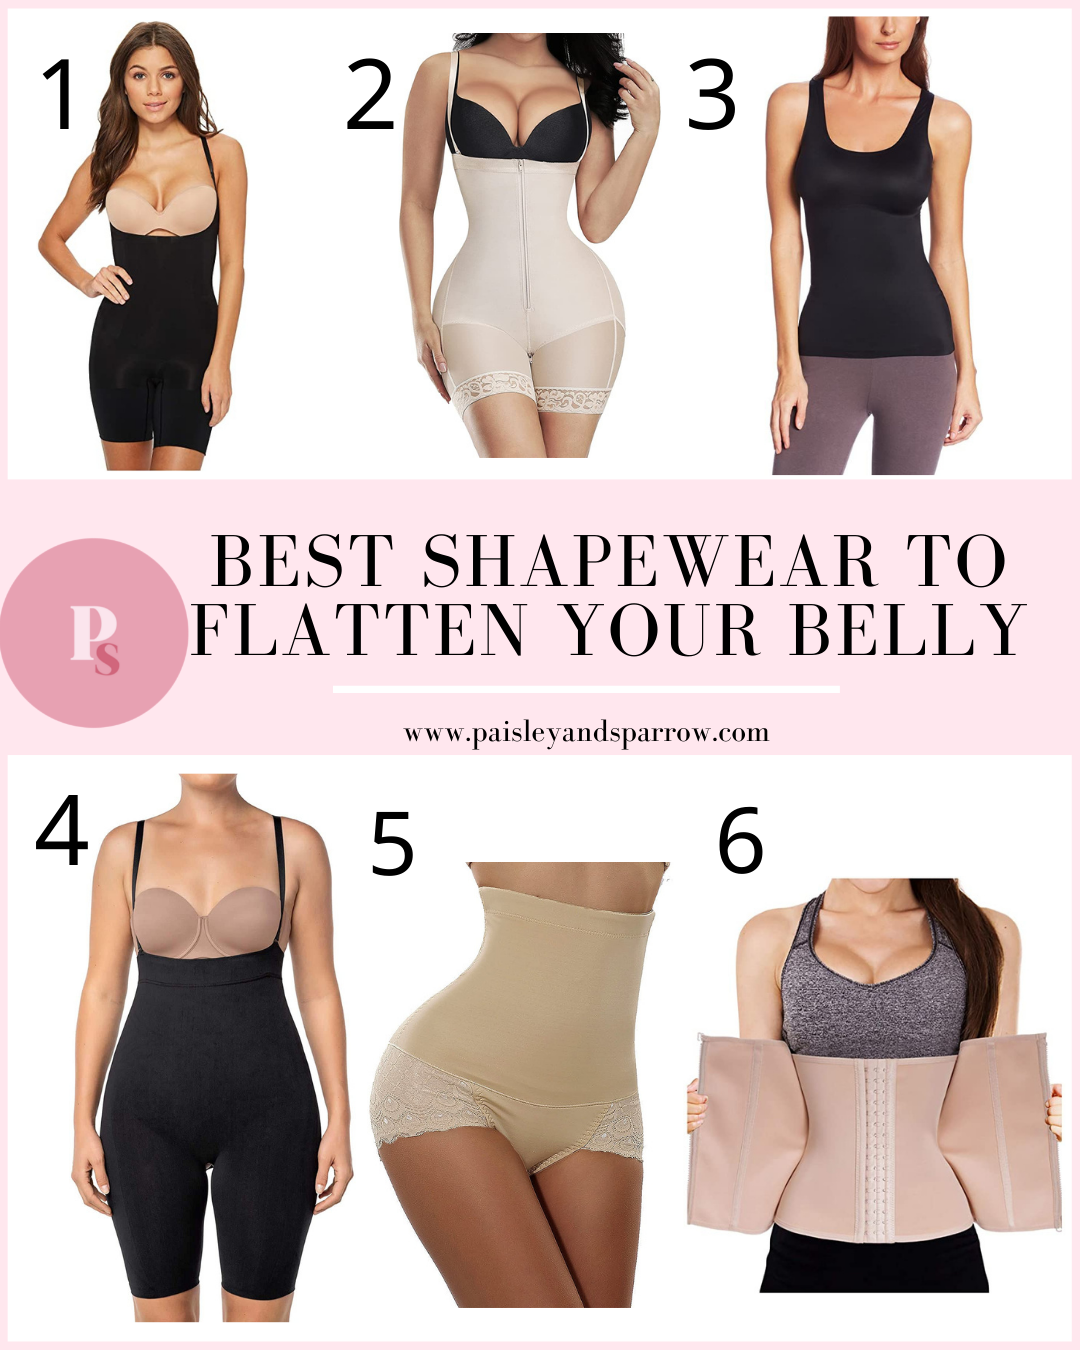 blad Mus optocht 6 Best Shapewear for Lower Belly Pooch - Paisley & Sparrow